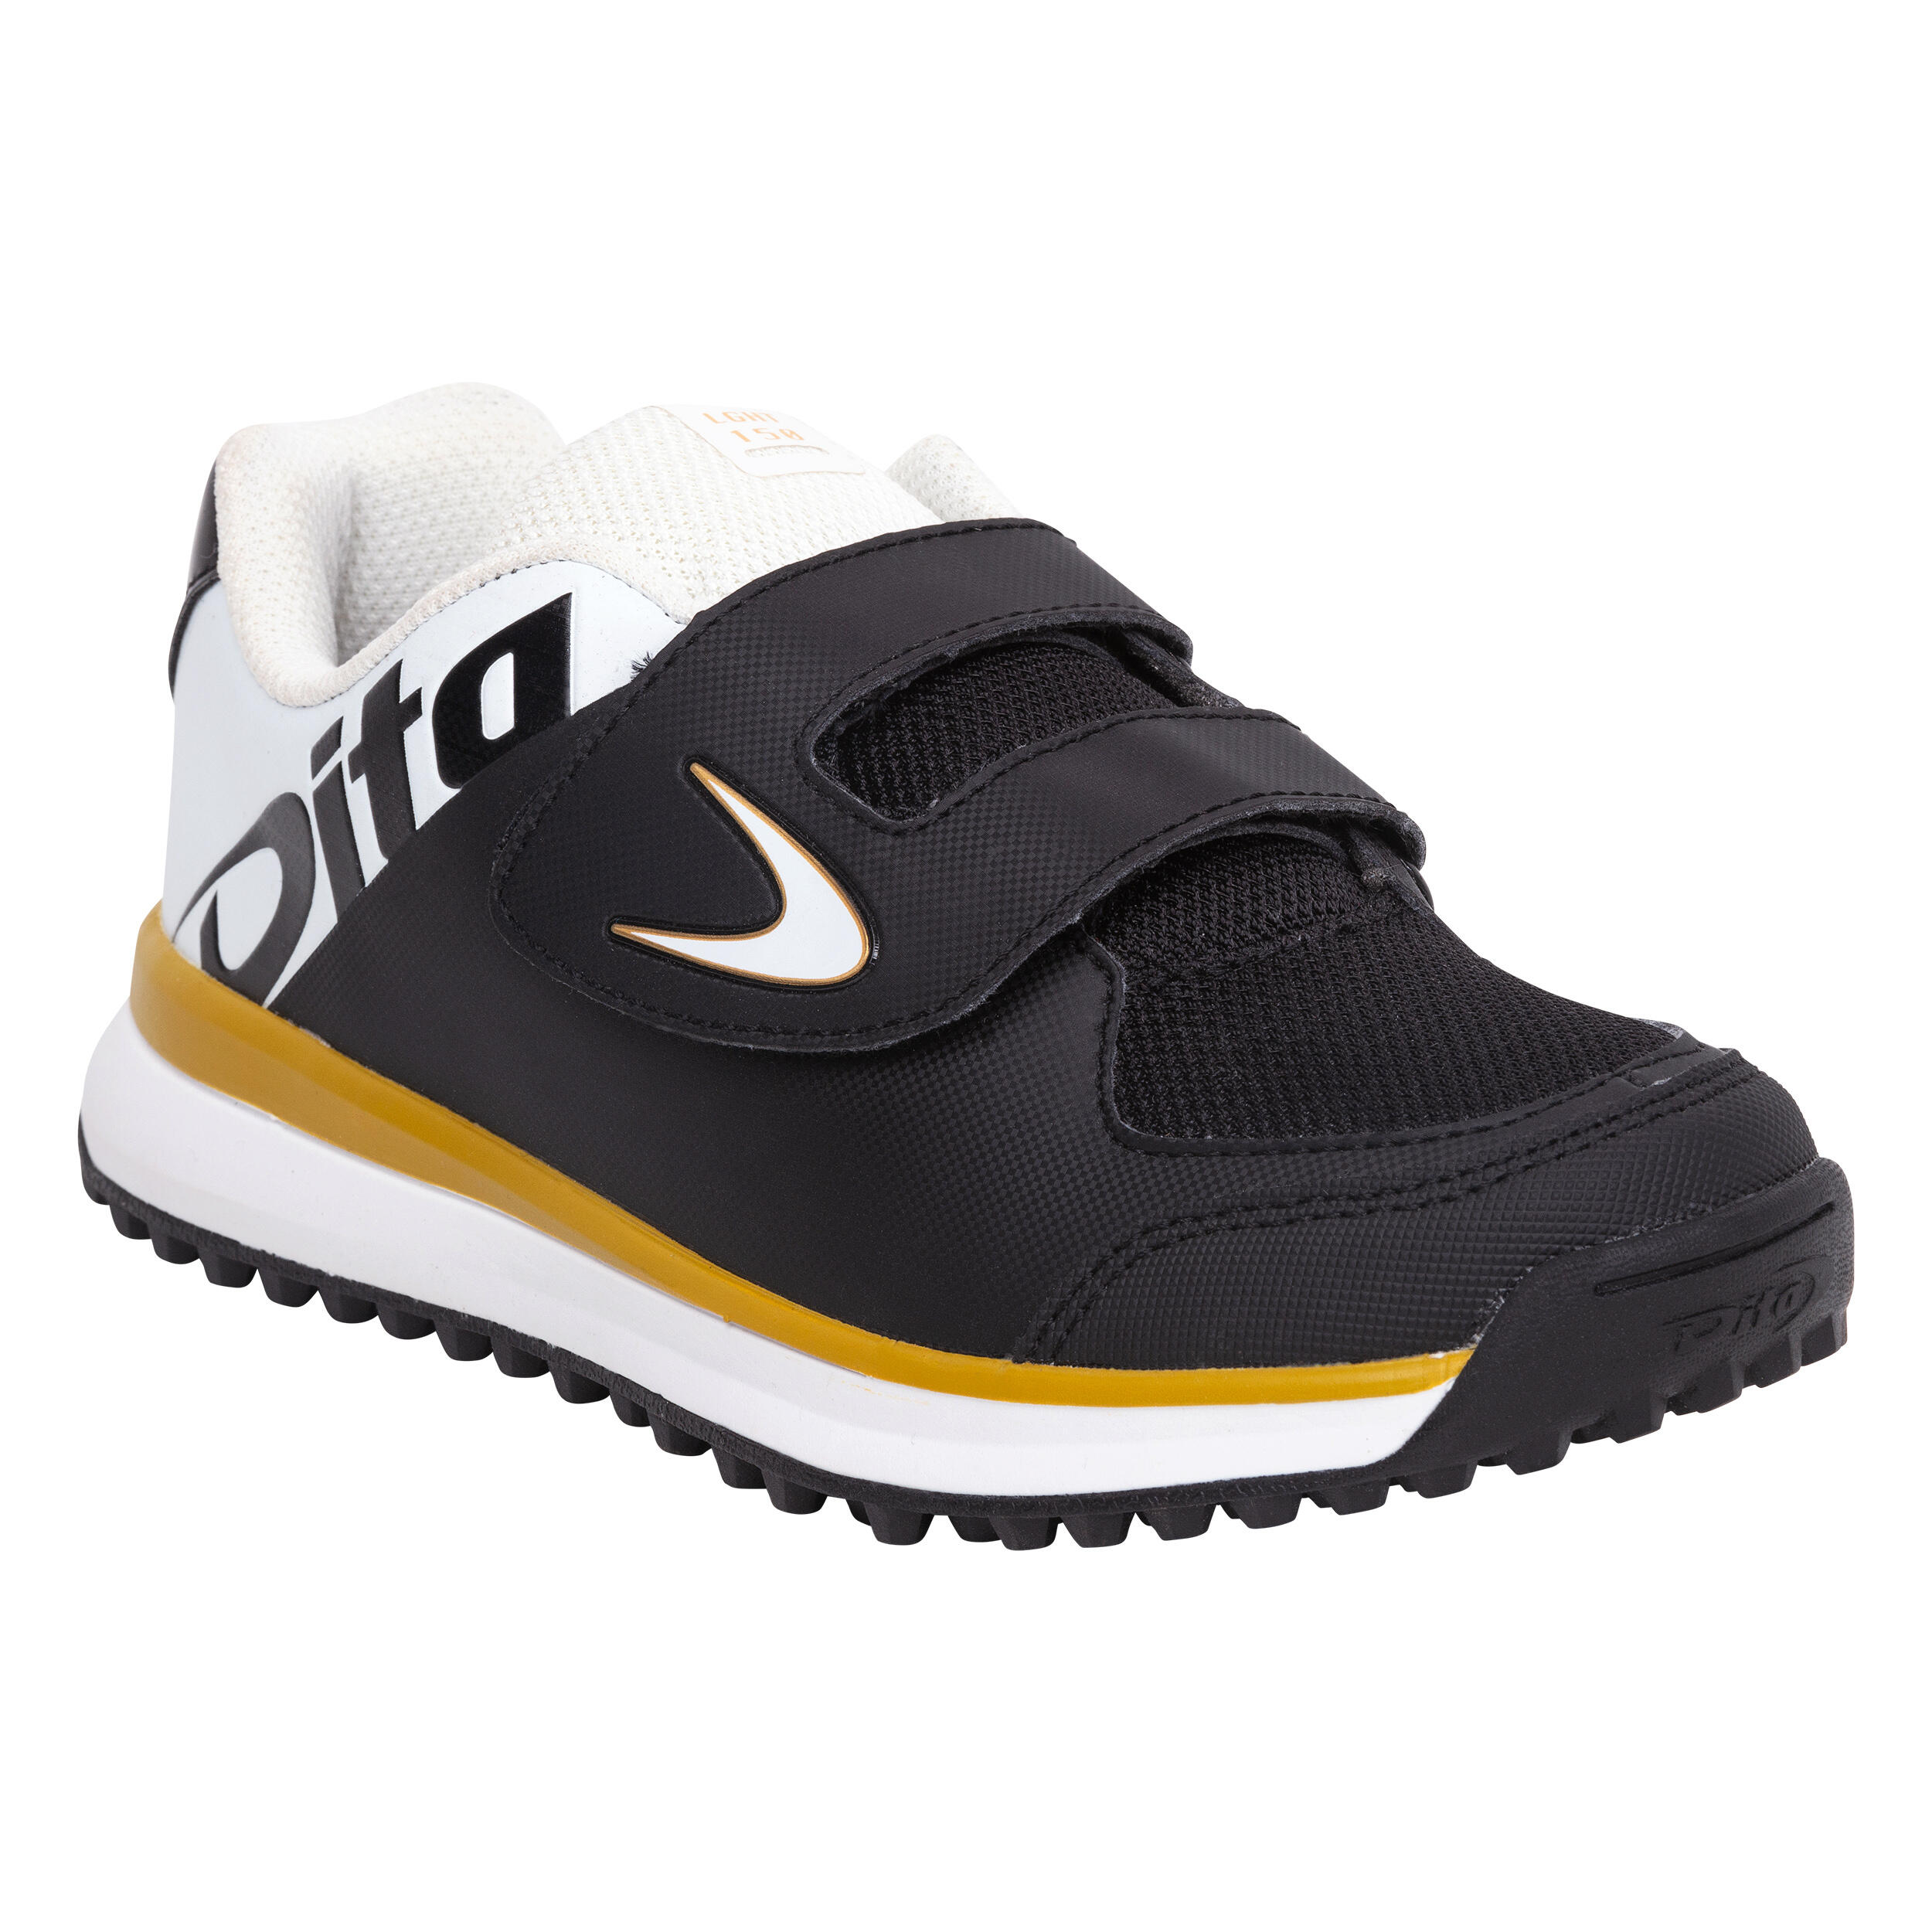 Kids' Low-Intensity Field Hockey Shoes Fix And Go - White/Black 2/7